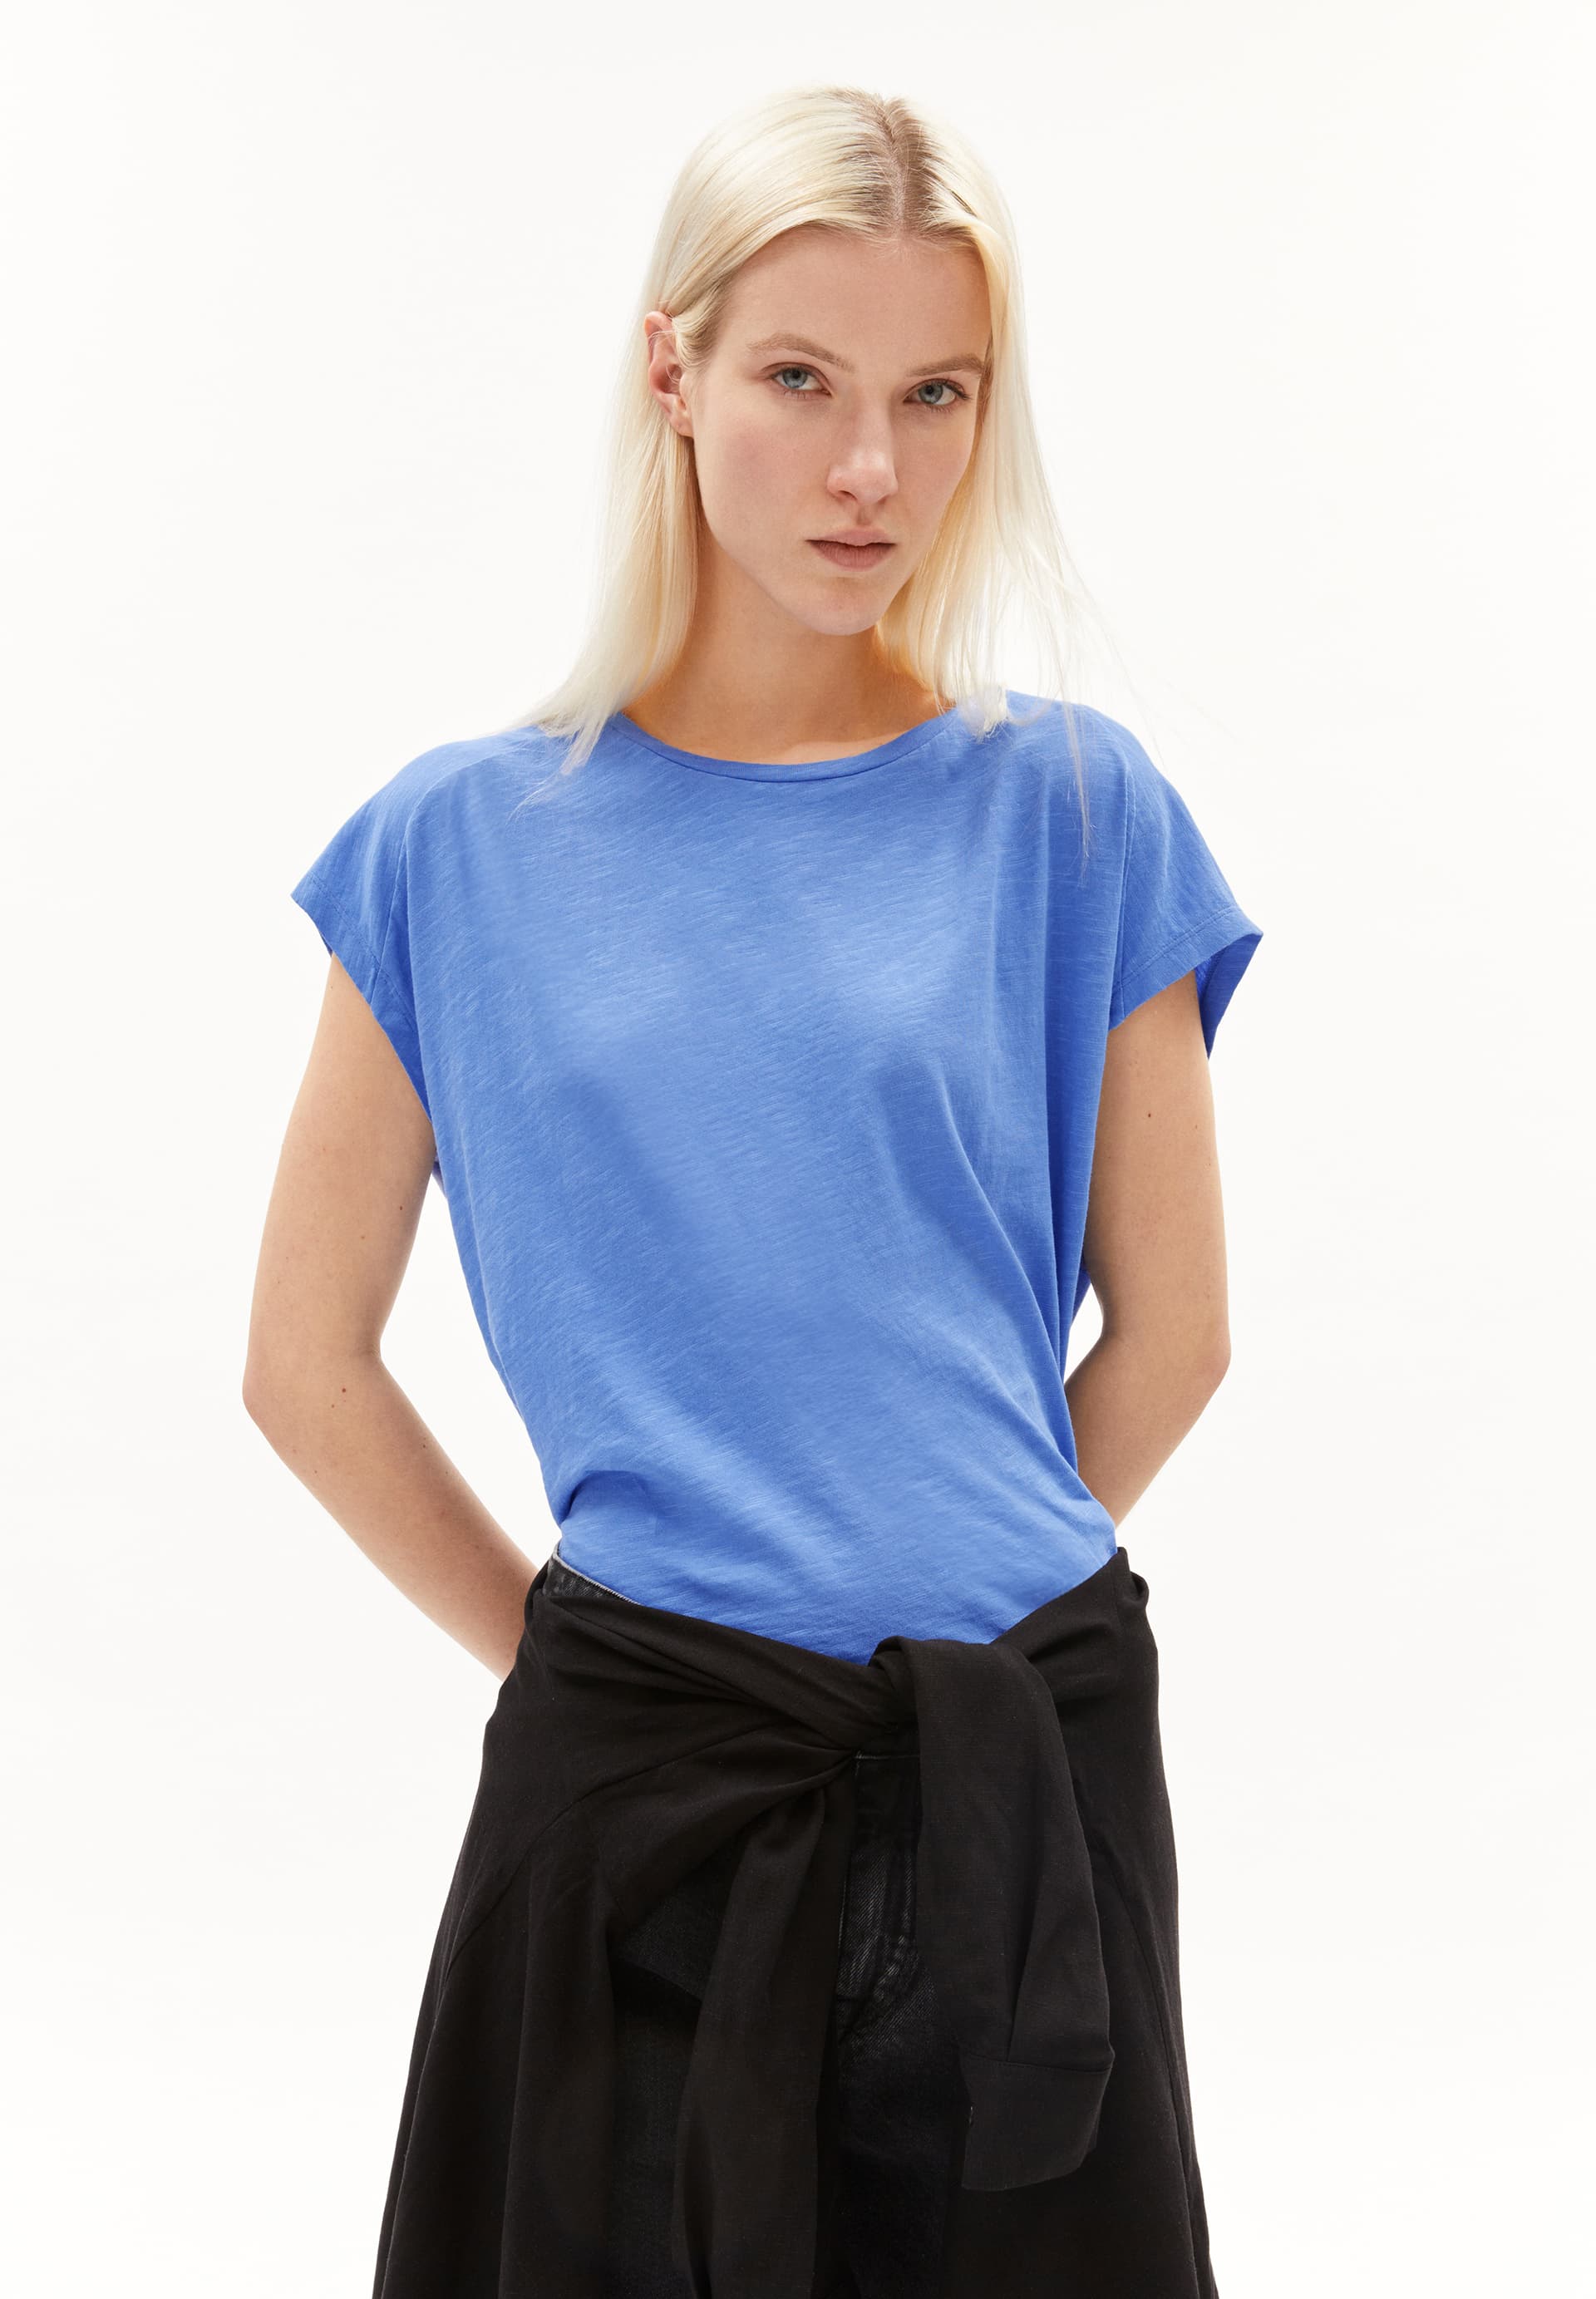 ONELIAA T-Shirt Loose Fit made of Organic Cotton